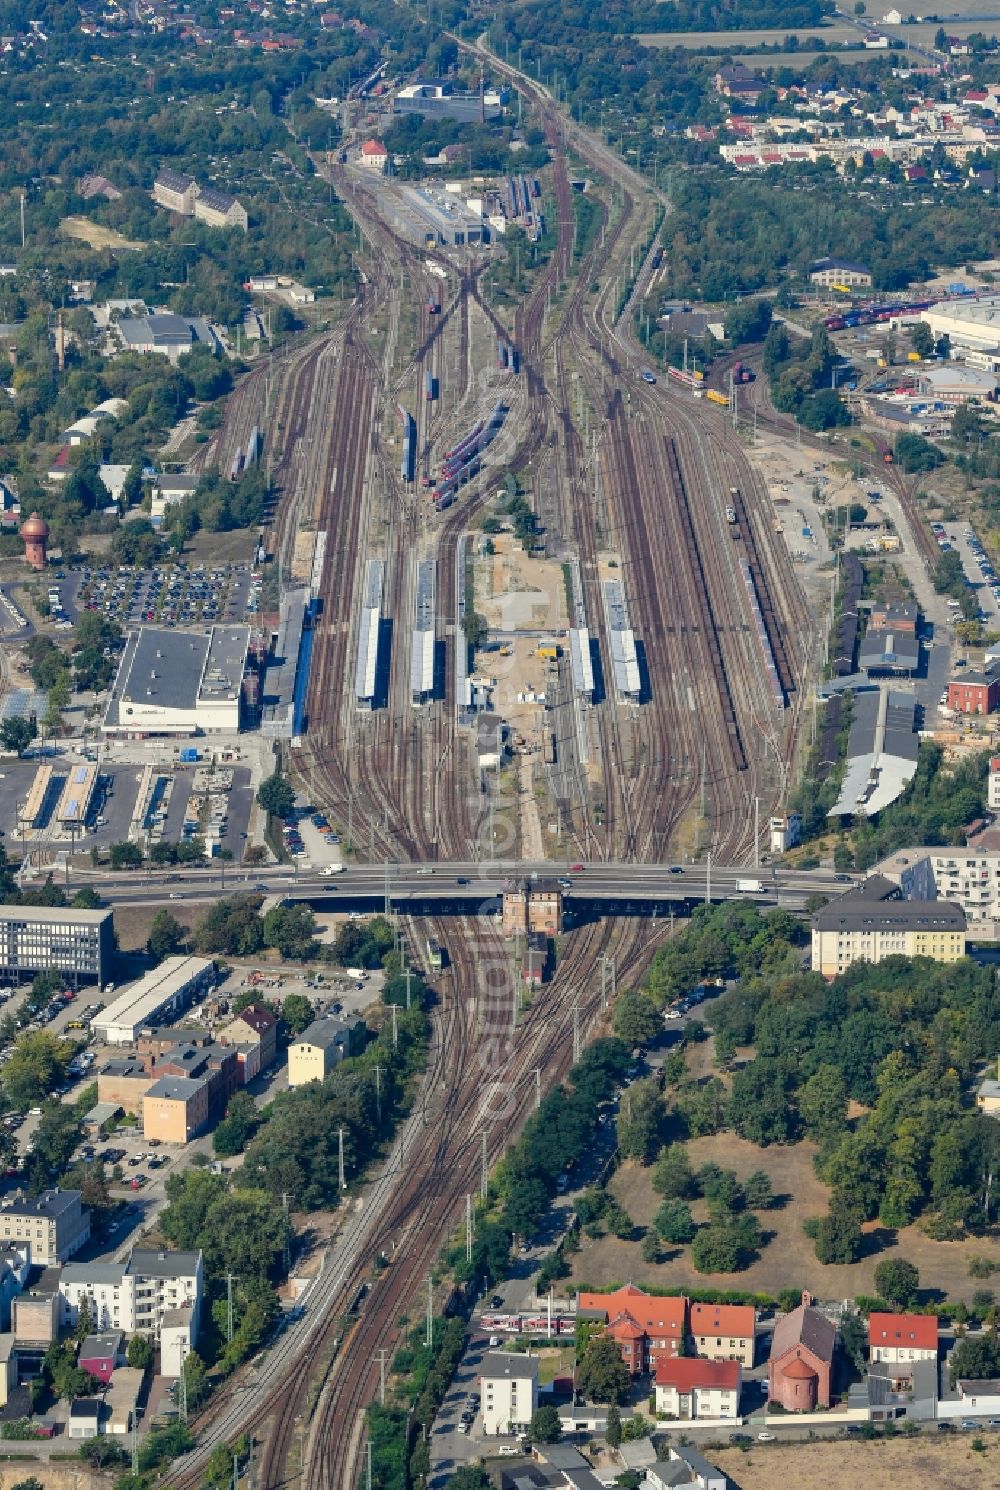 Aerial image Cottbus - Track progress and building of the main station of the railway in Cottbus in the state Brandenburg, Germany